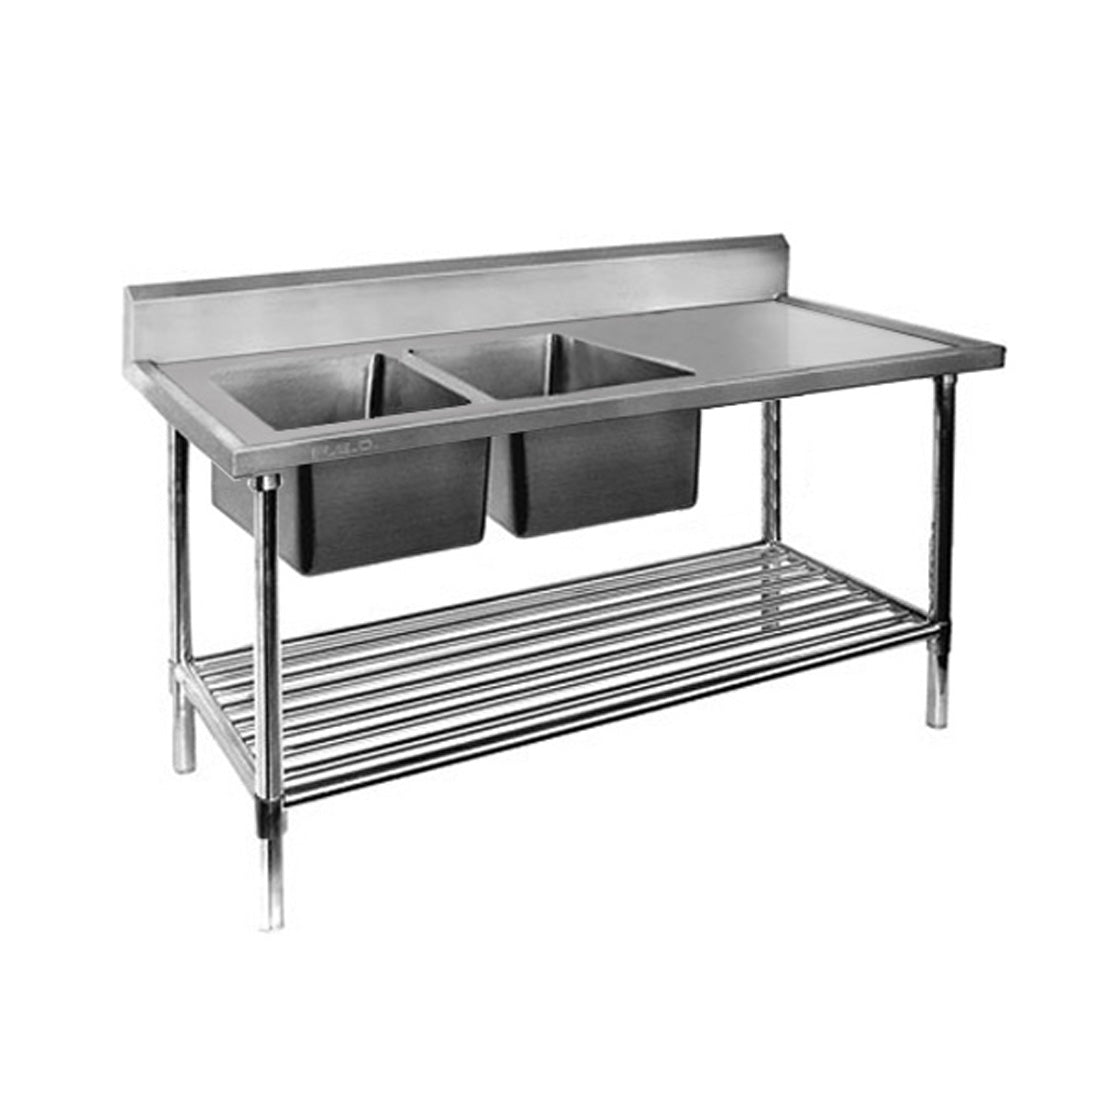 Modular Systems Double Left Sink Bench with Pot Undershelf 2100x700x900 DSB7-2100L/A